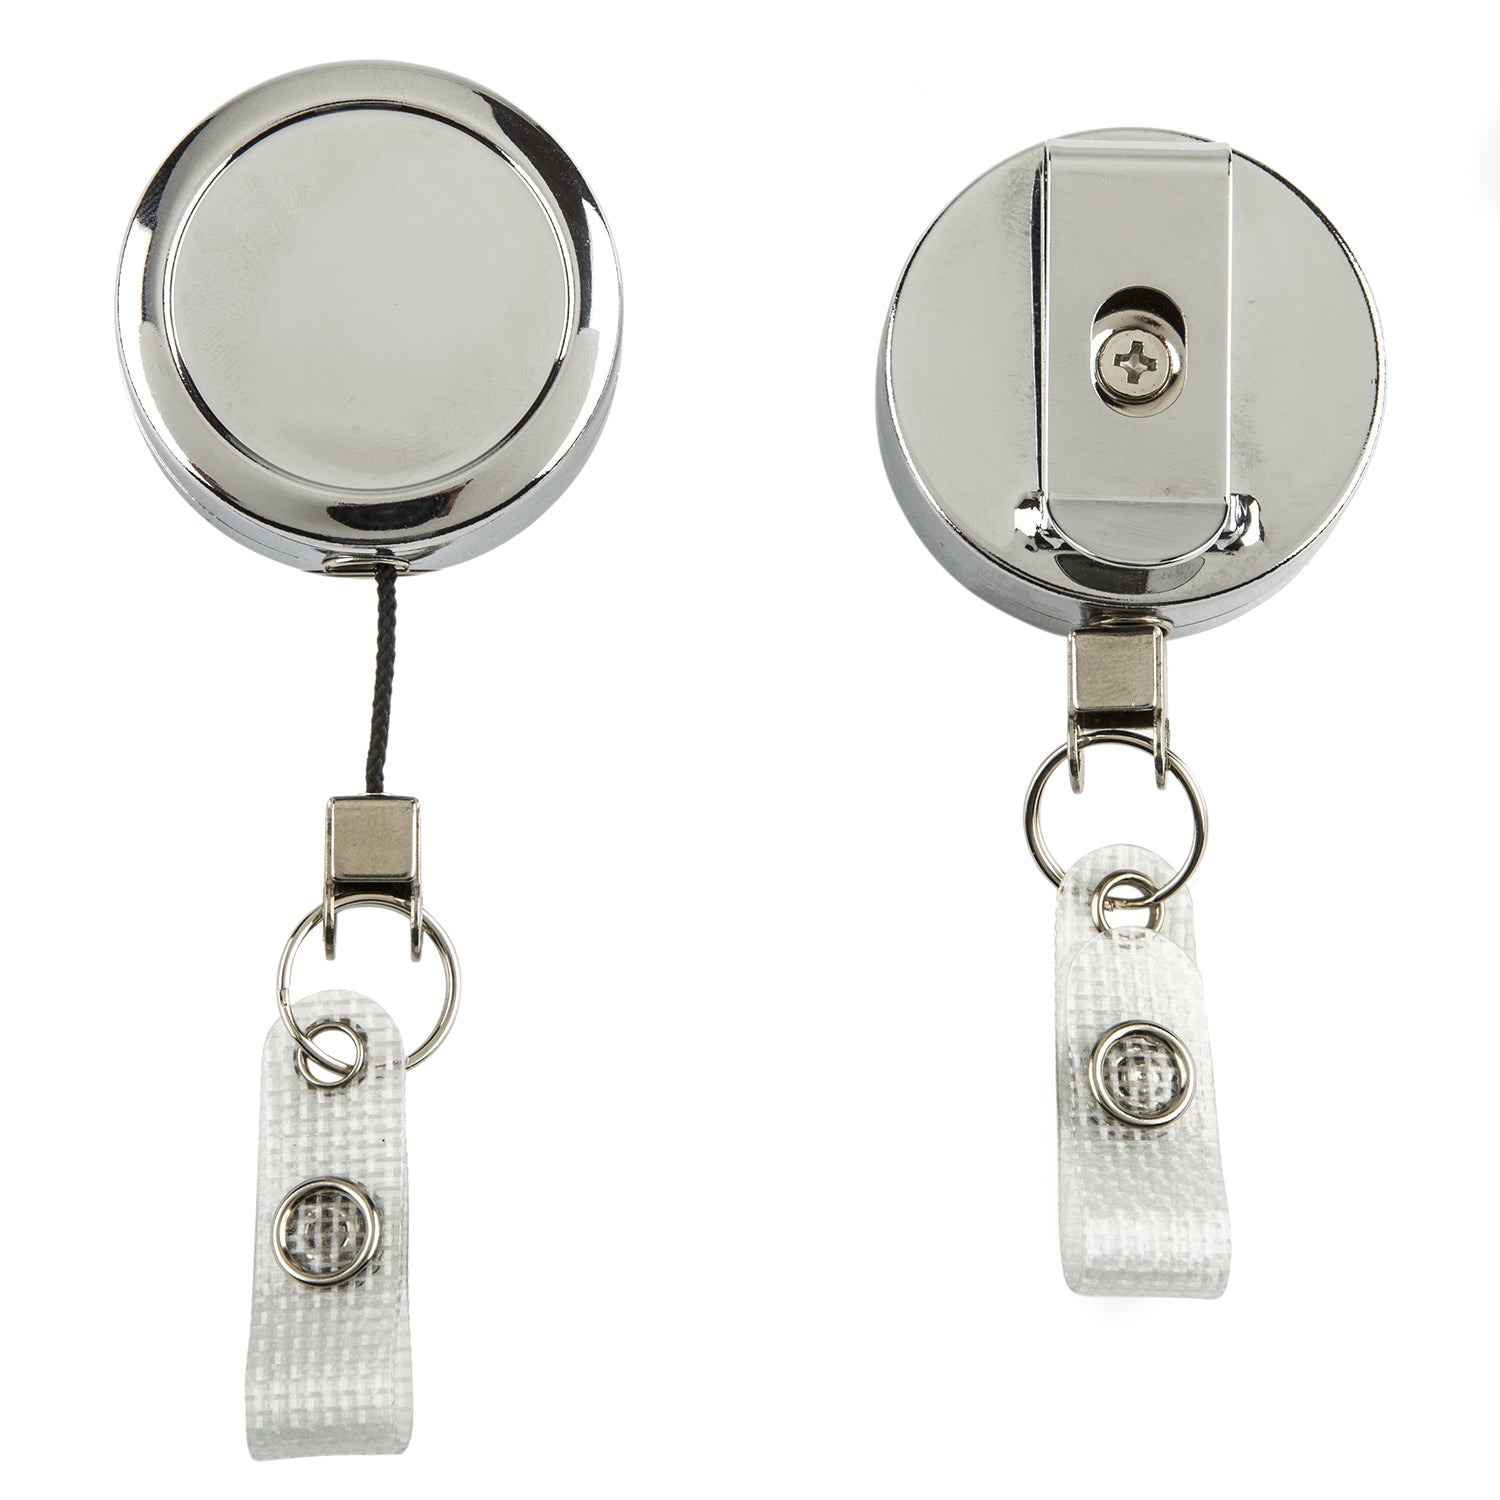 Chrome heavy duty badge reel with strap - Pack of 10 – Medisave UK